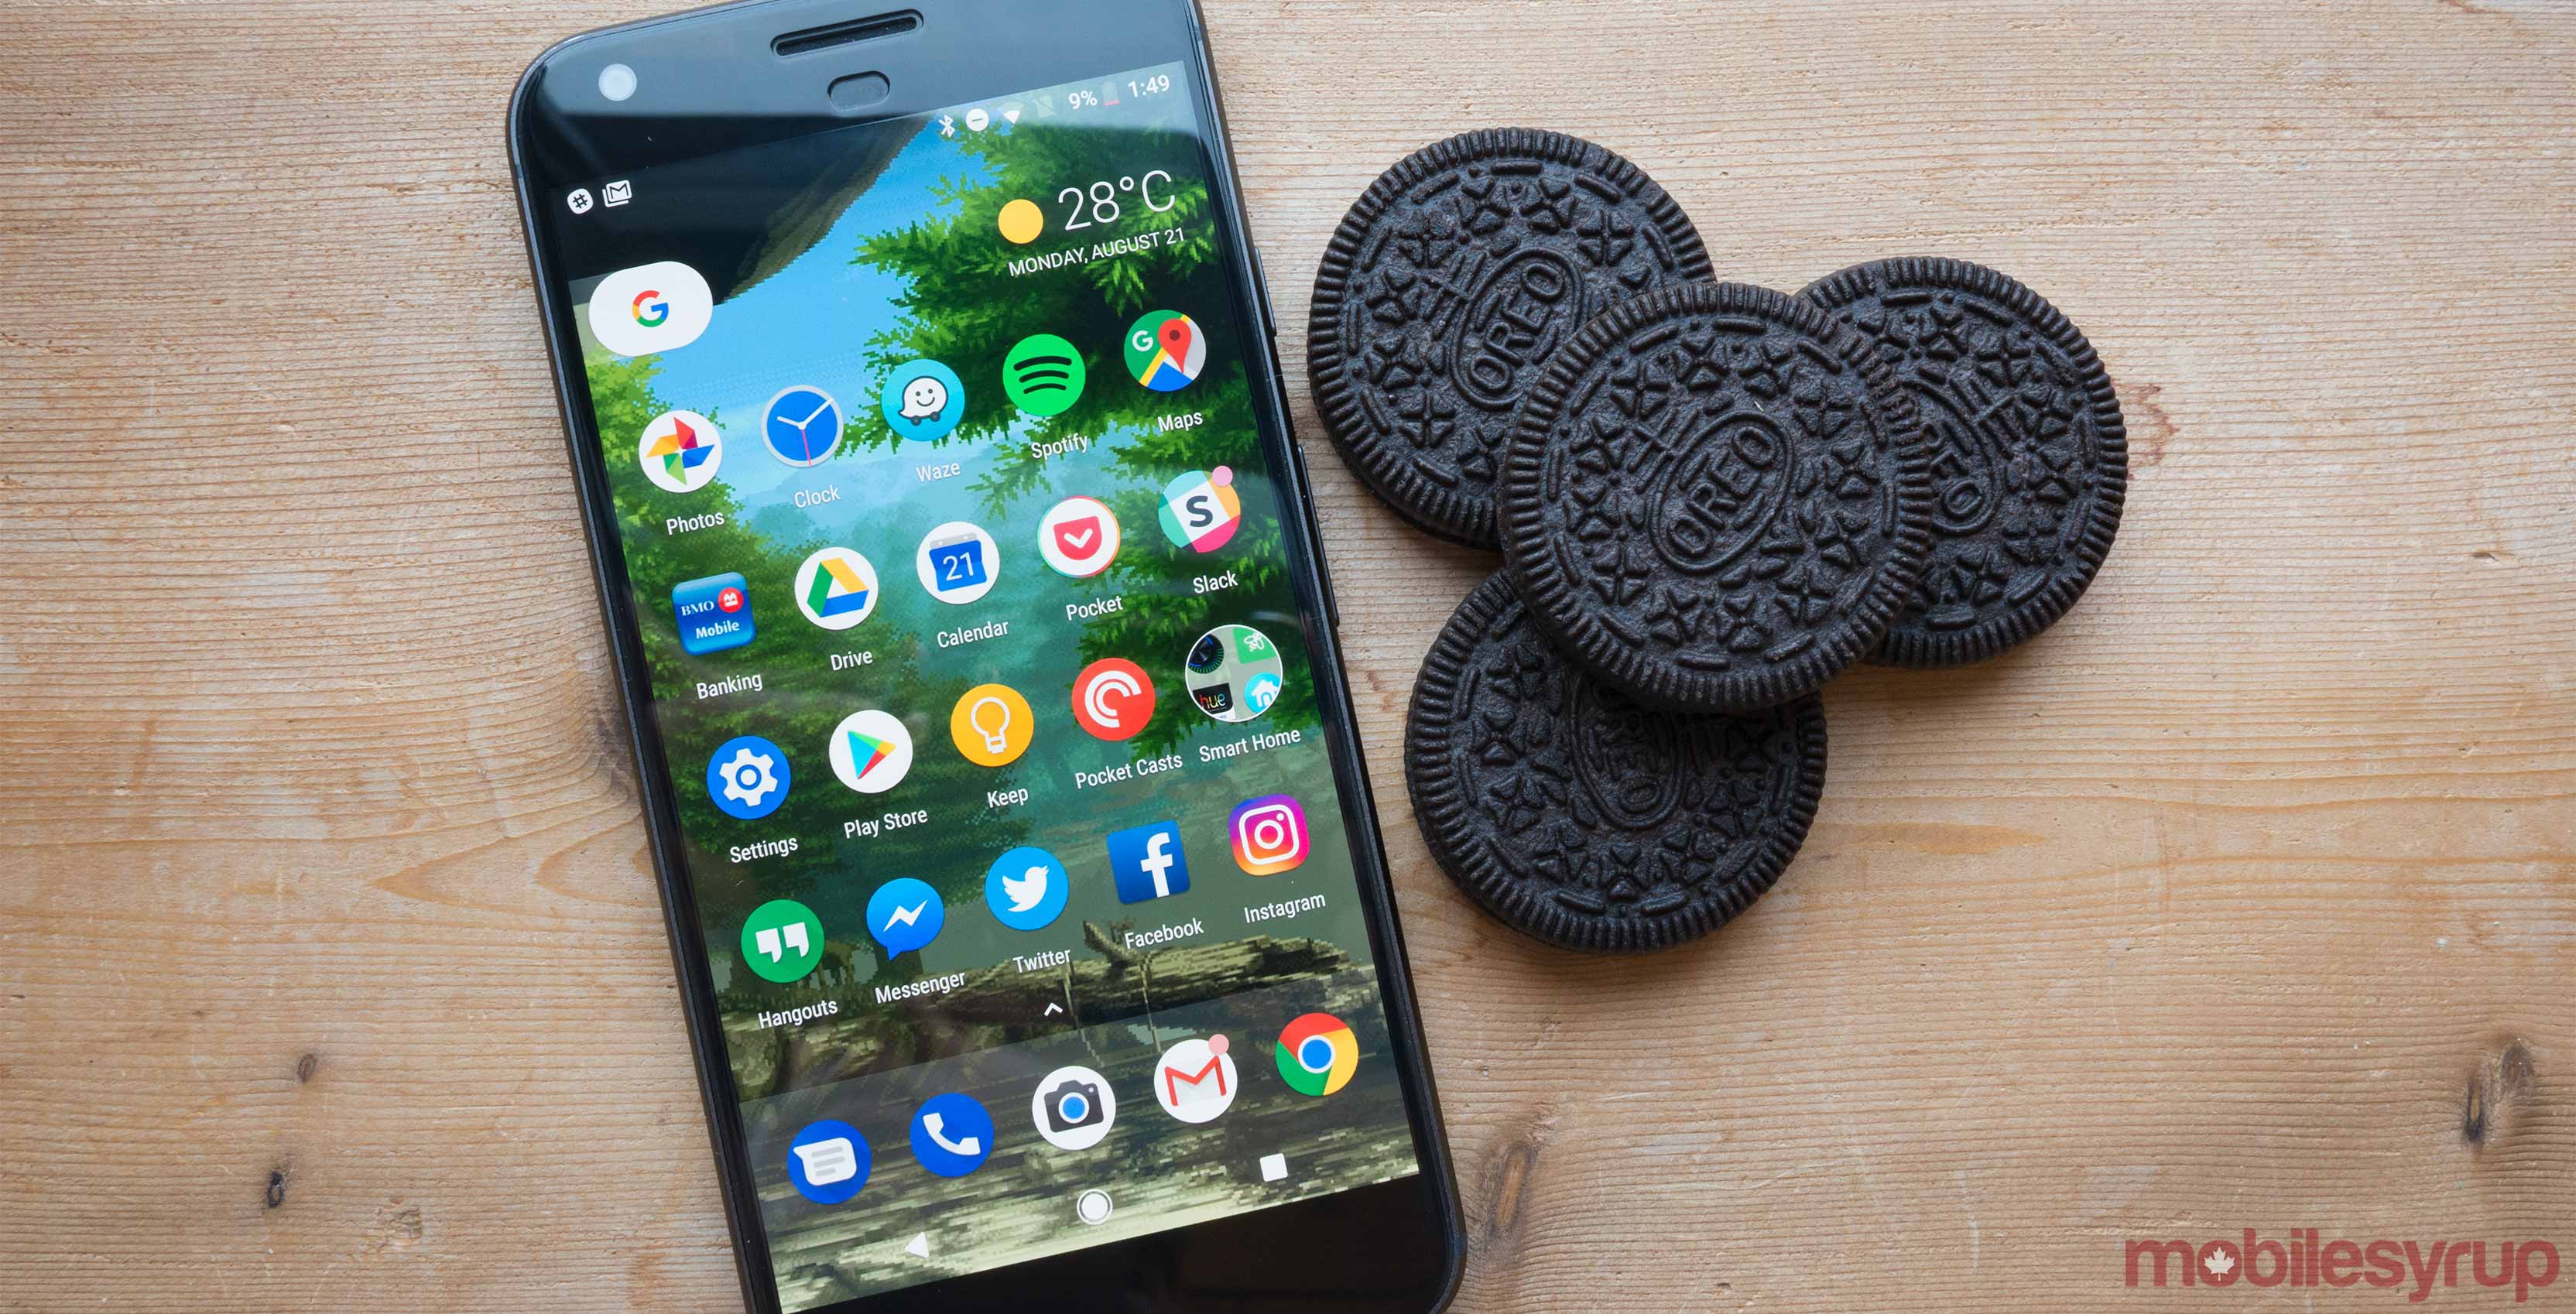 Android phone with Oreo cookies